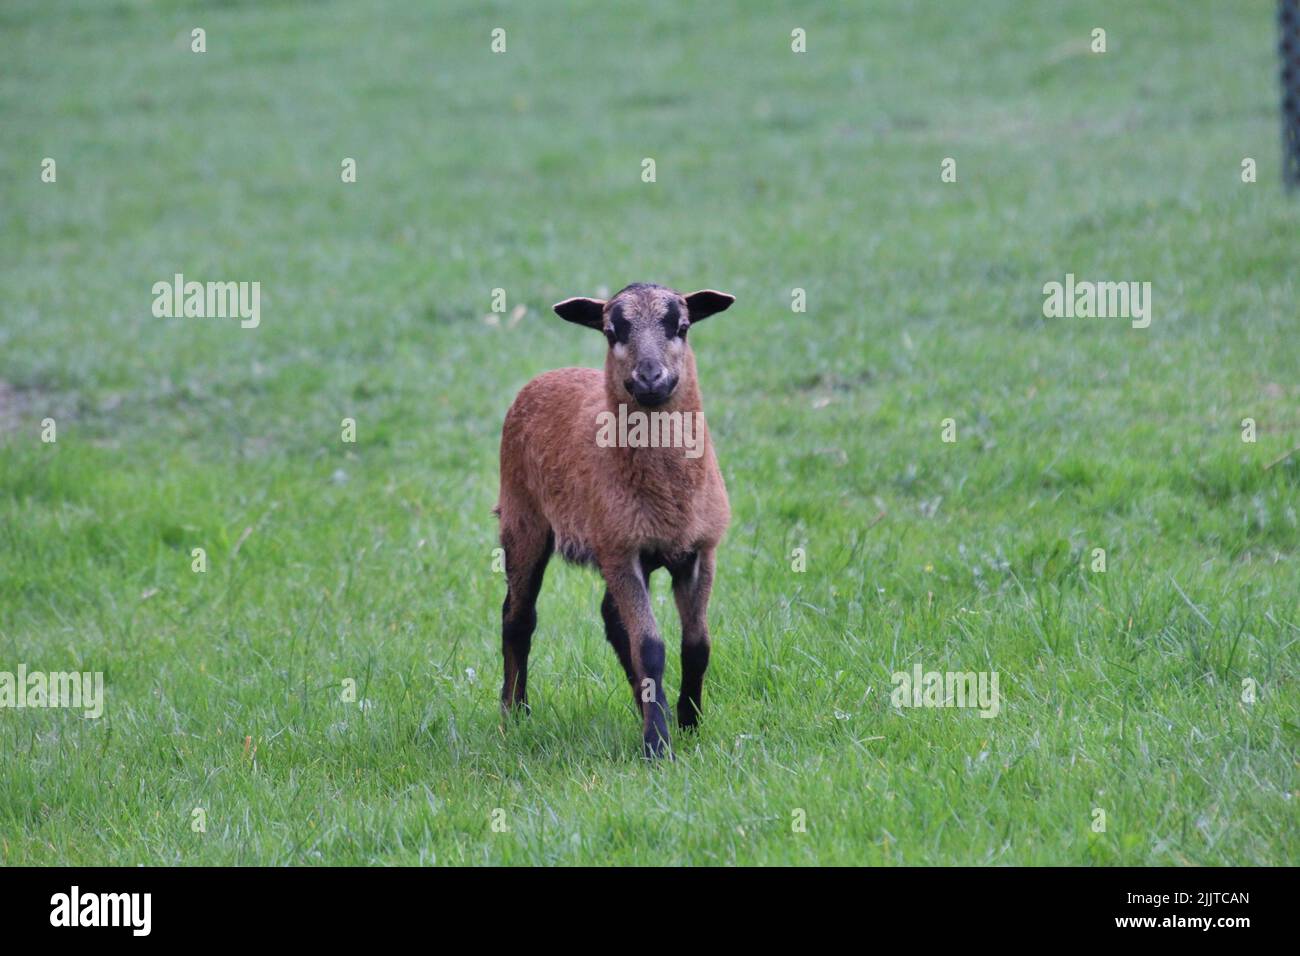 A closeup of a Cameroon sheep walking on a grass Stock Photo